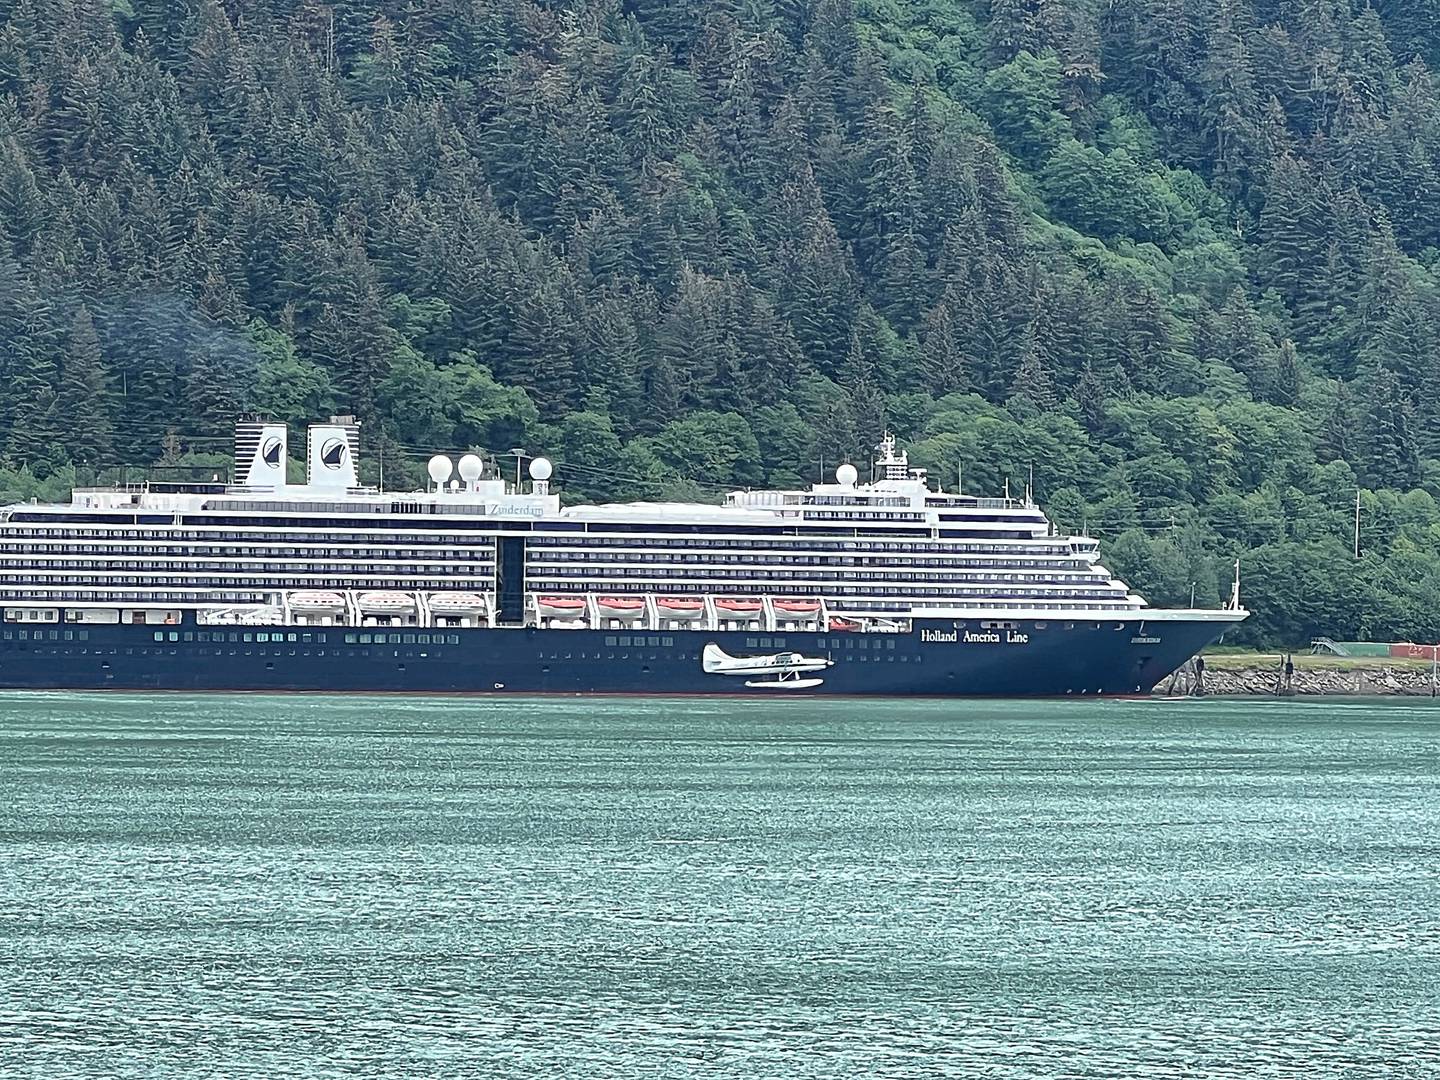 Holland America Line's “Nieuw Amsterdam” rests at the dock in Juneau